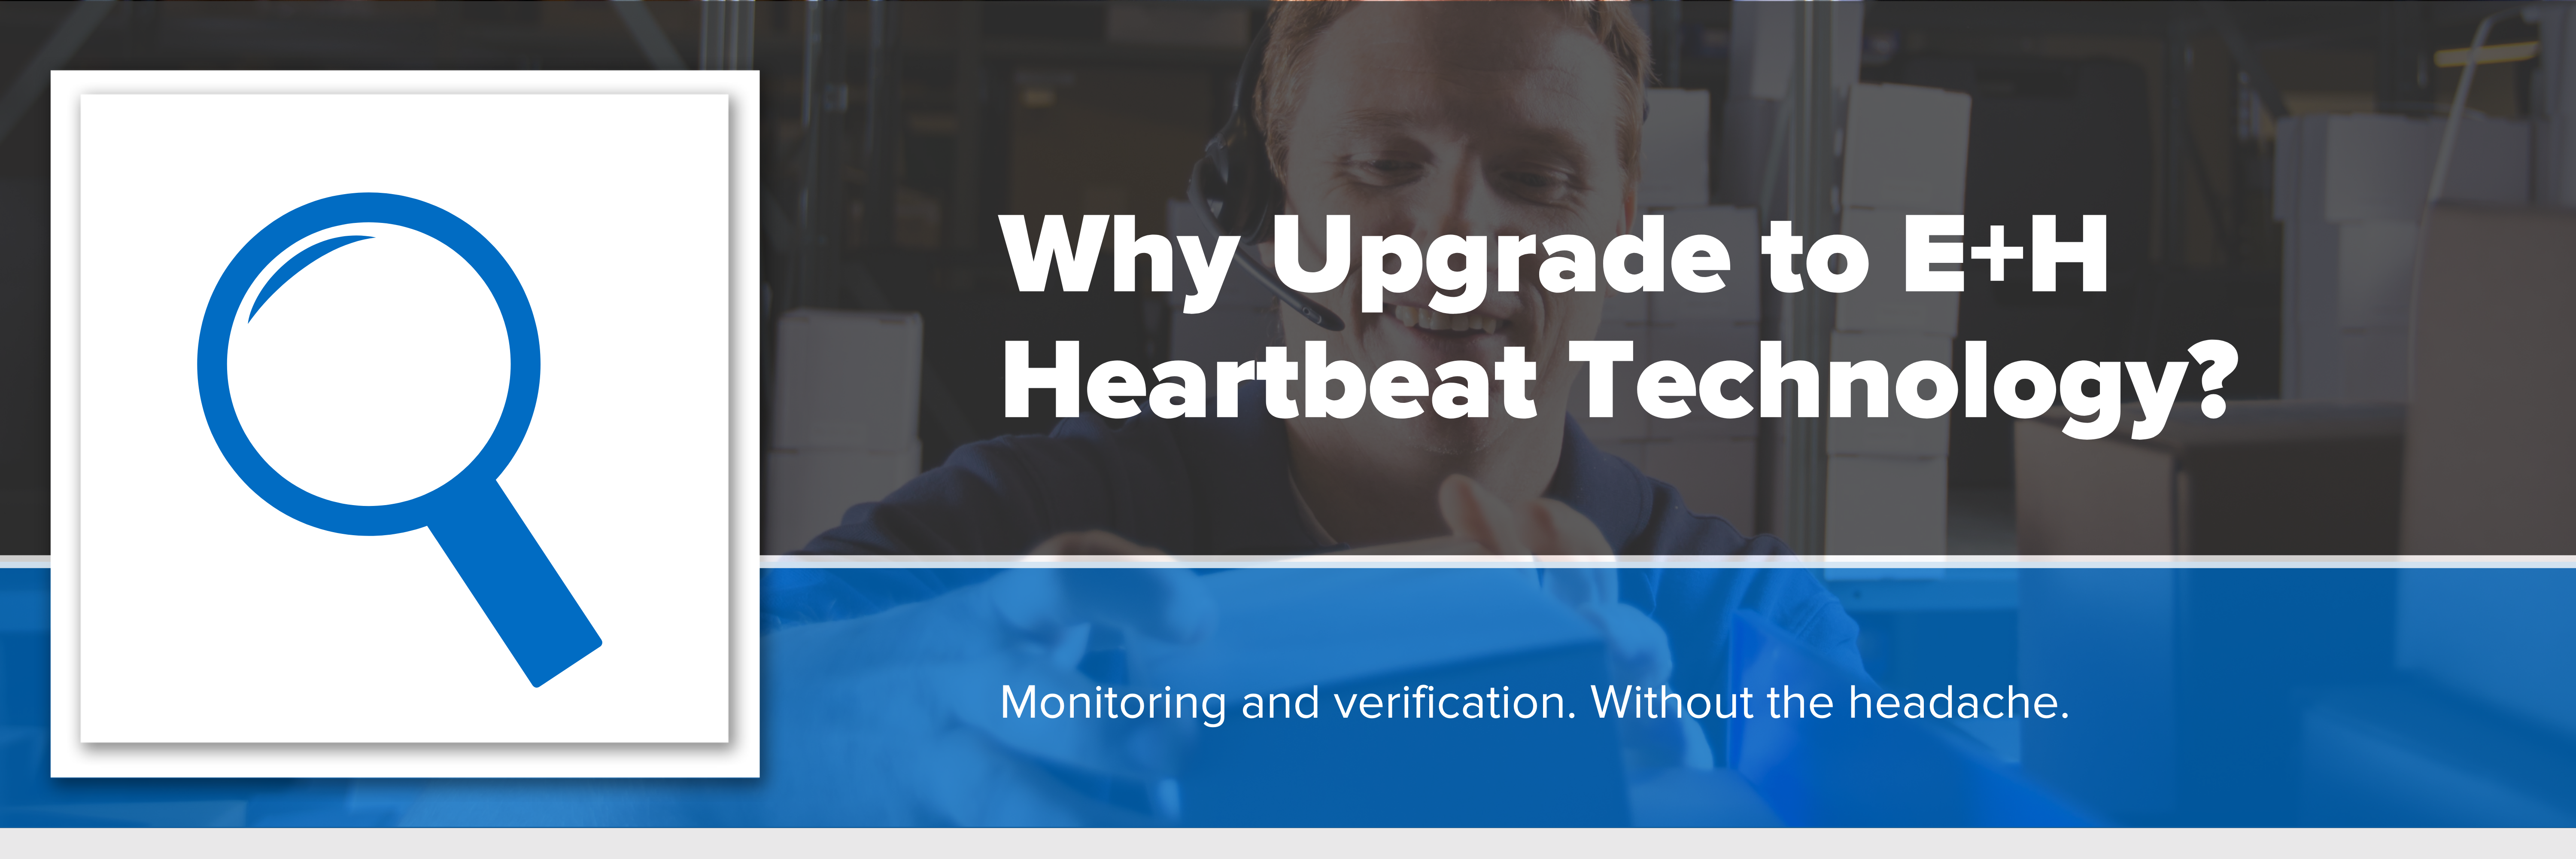 Header image with text "Why Upgrade to E+H Heartbeat Technology?"